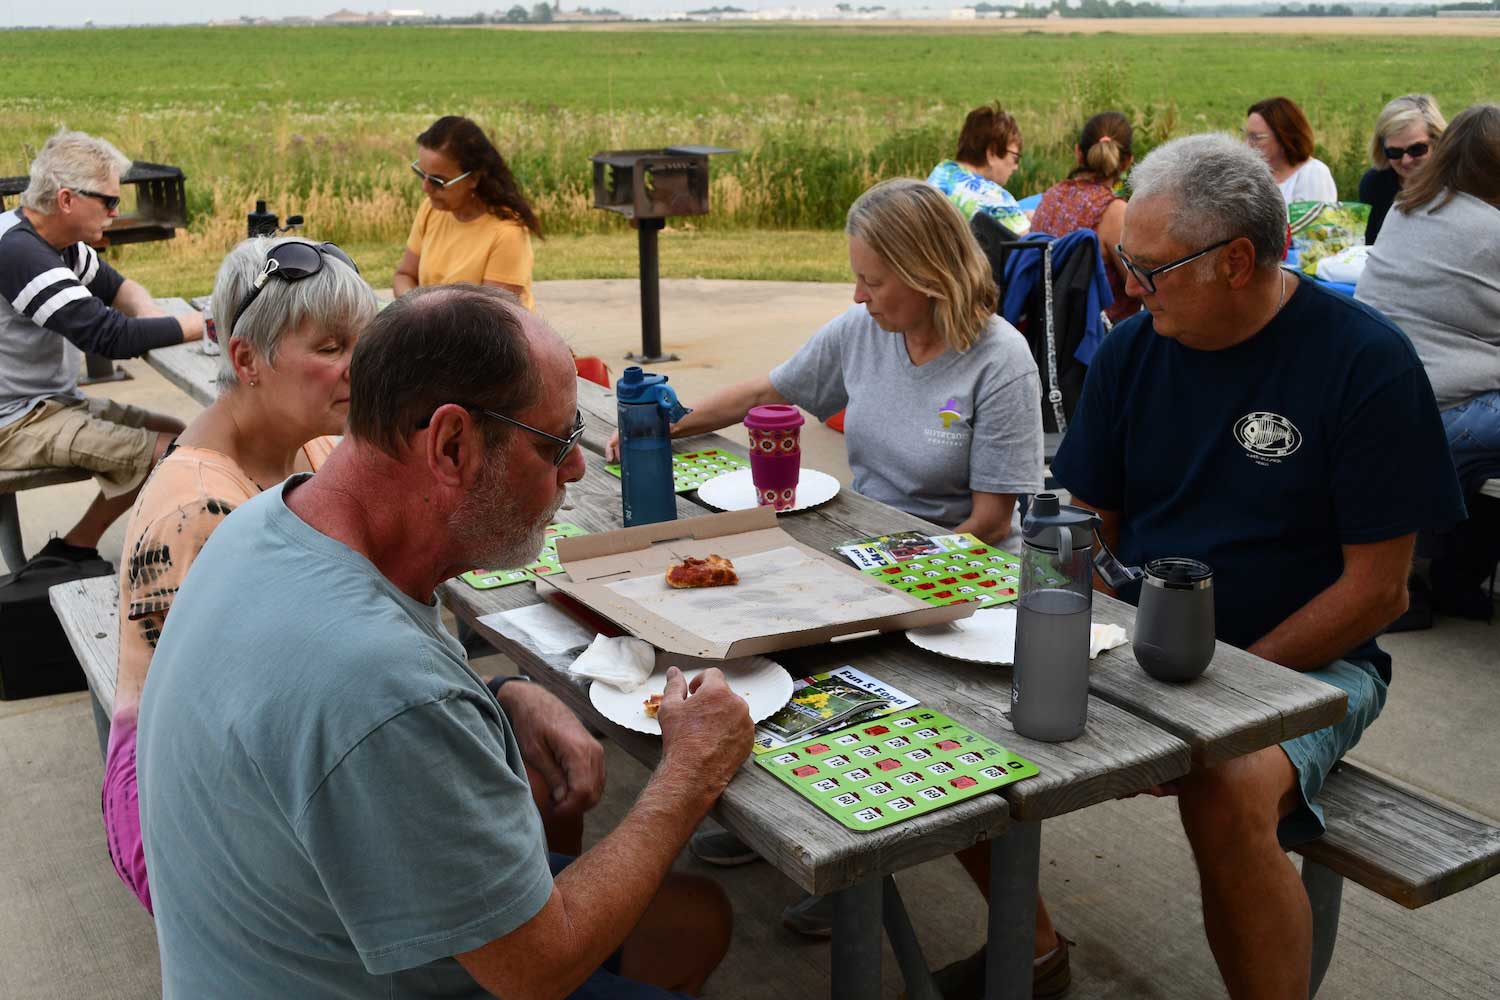 People sitting outdoors at picnic tables playing bingo.